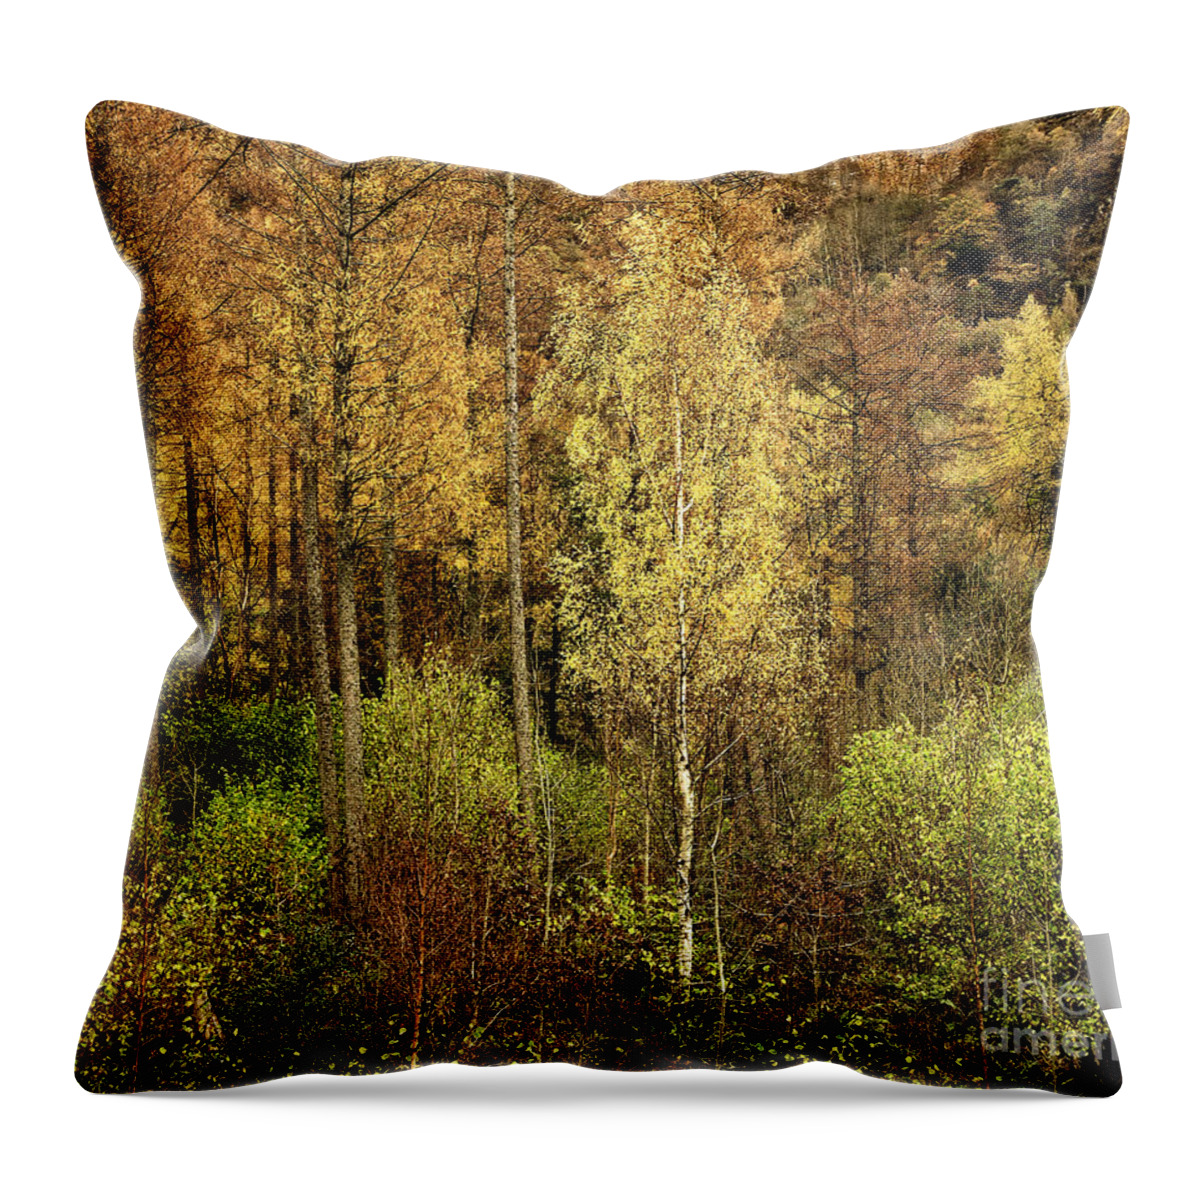 50 Shades Gold Golden Autumn Wonderland Fall Smart Uk Woodland Woods Forest Trees Foliage Leaves Beautiful Birch Crown Beauty Landscape Rich Colors Yellow Delightful Magnificent Mindfulness Serenity Inspirational Serene Tranquil Tranquillity Magic Charming Atmospheric Aesthetic Attractive Picturesque Scenery Glorious Impressionistic Impressive Pleasing Stimulating Magical Vivid Trunks Effective Green Bushes Delicate Gentle Joy Enjoyable Relaxing Pretty Uplifting Poetic Orange Red Fantastic Tale Throw Pillow featuring the photograph Fifty Shades Of Gold by Tatiana Bogracheva